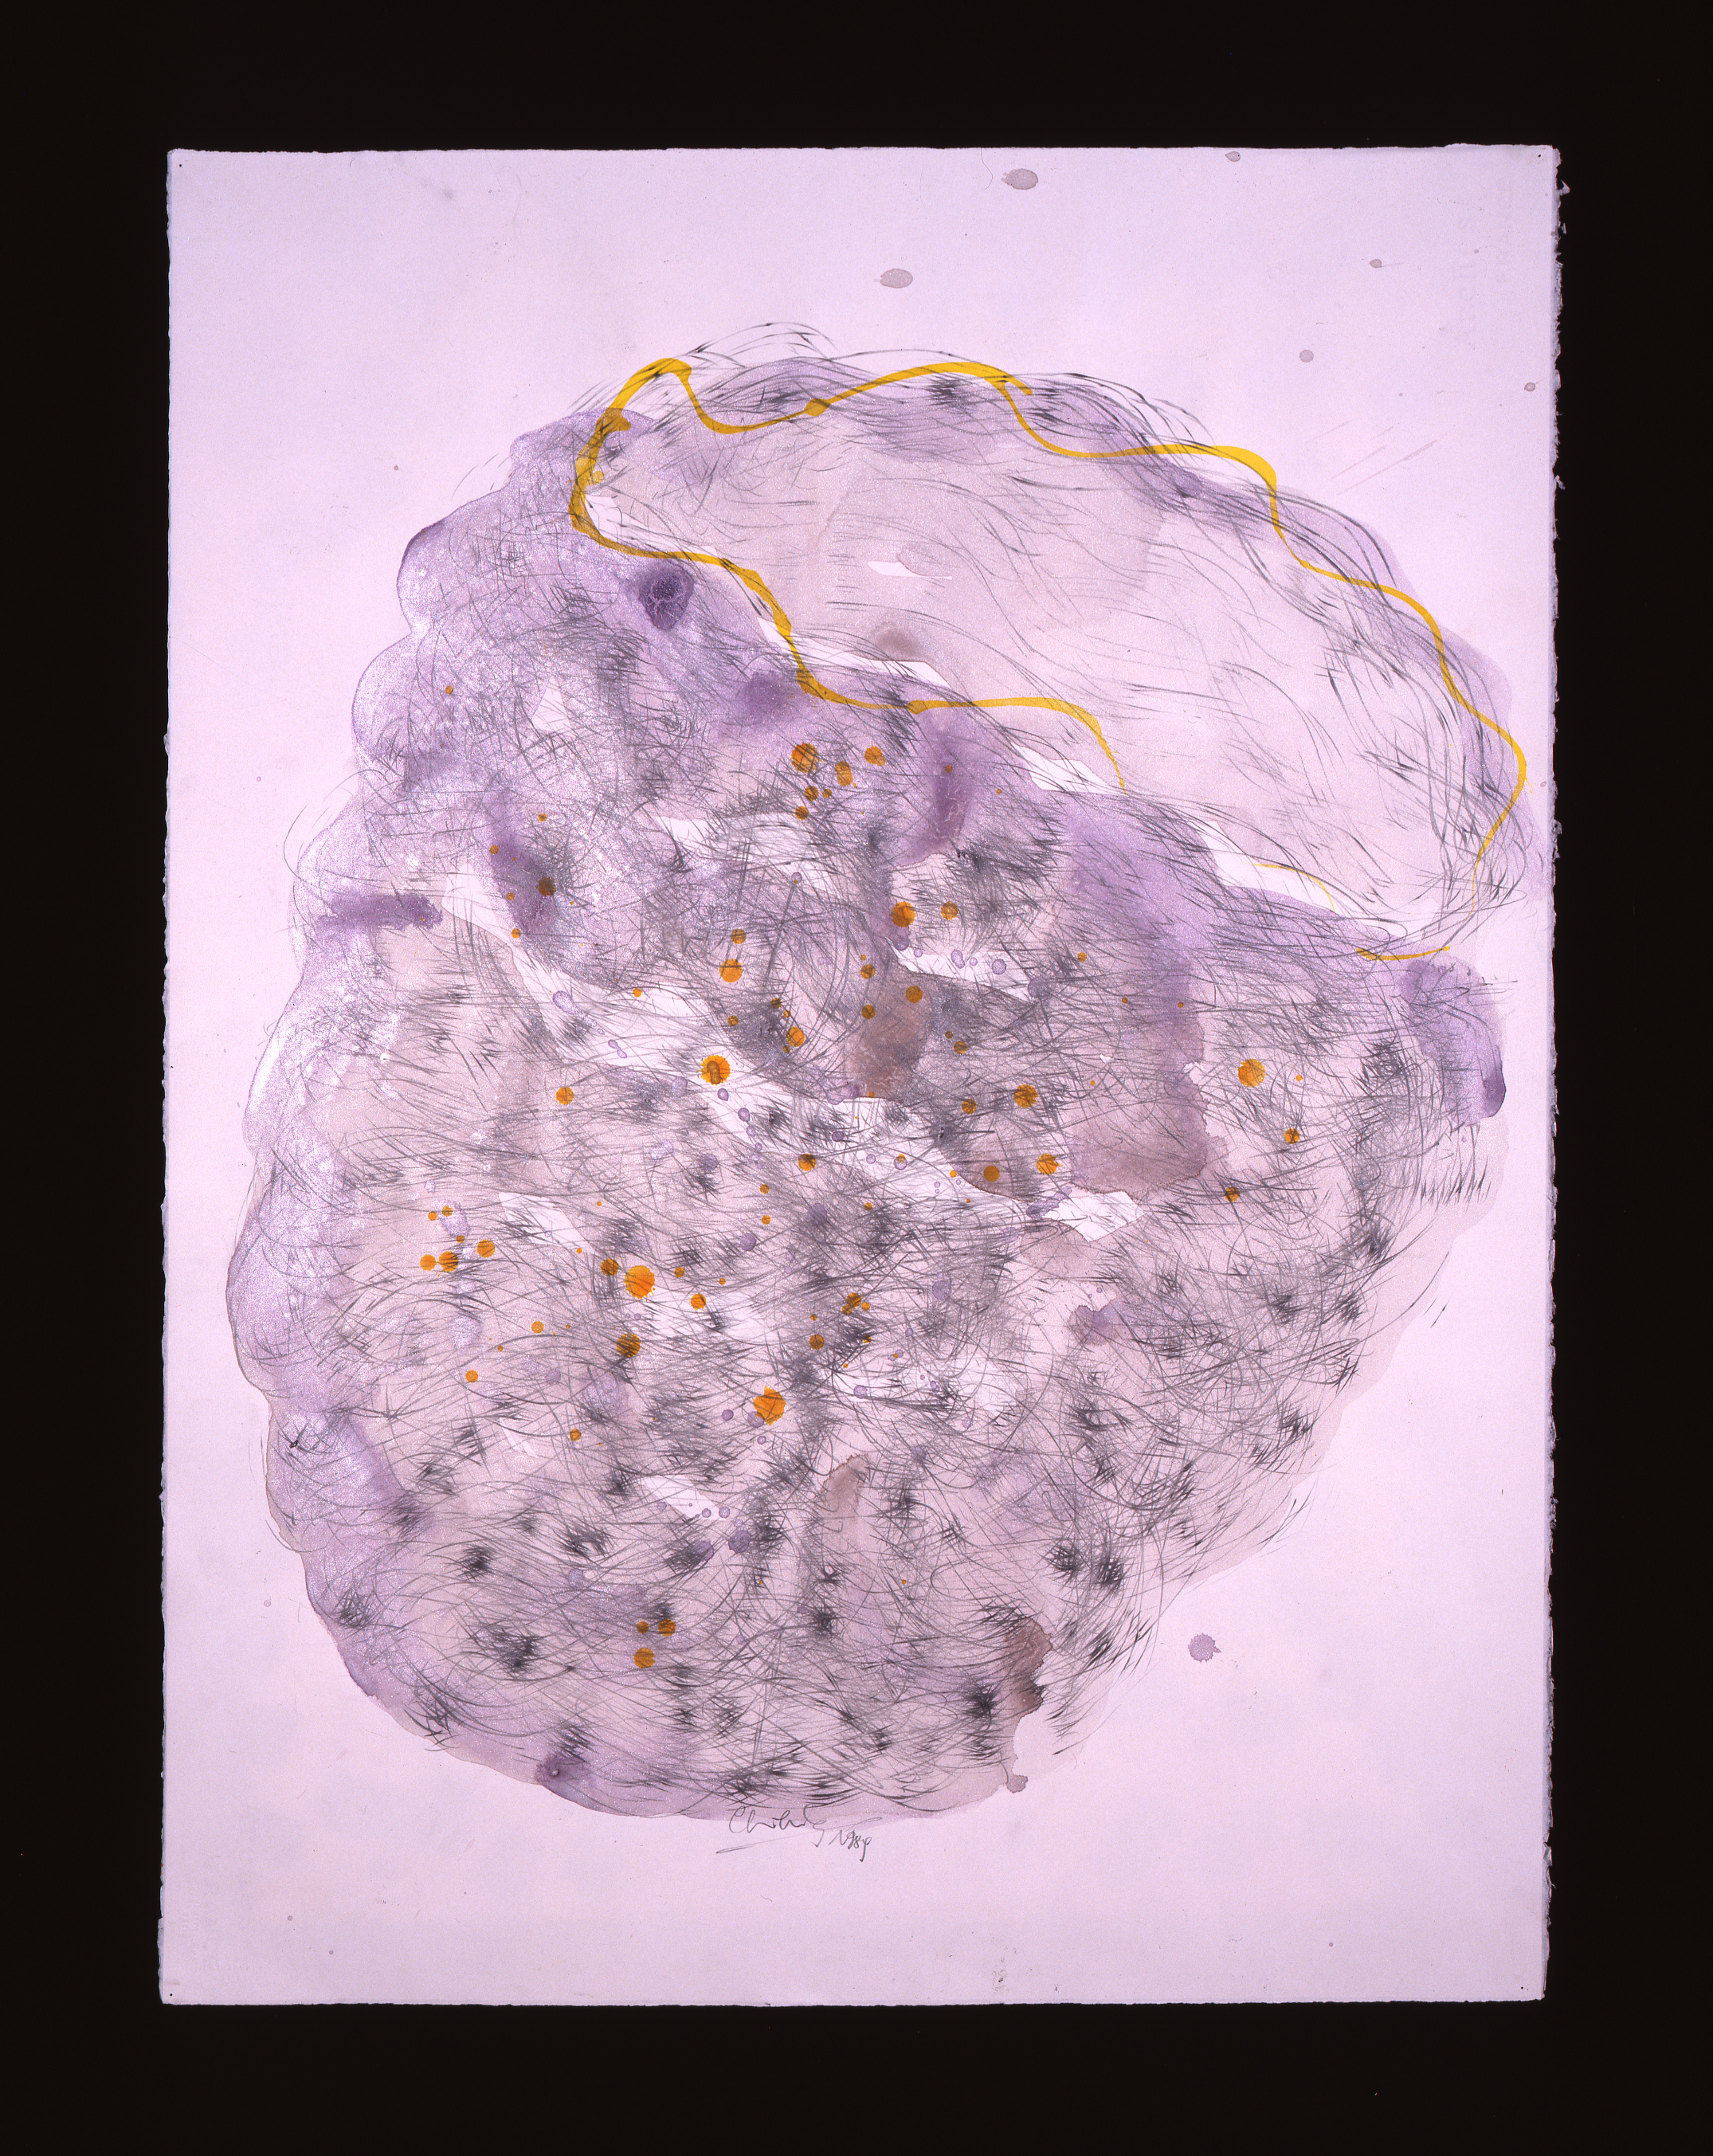  Dale Chihuly,&nbsp; Basket Drawing,&nbsp; (1984, watercolor, graphite, ink and colored pencil&nbsp;on paper, 30 x 22 inches), DC.367 